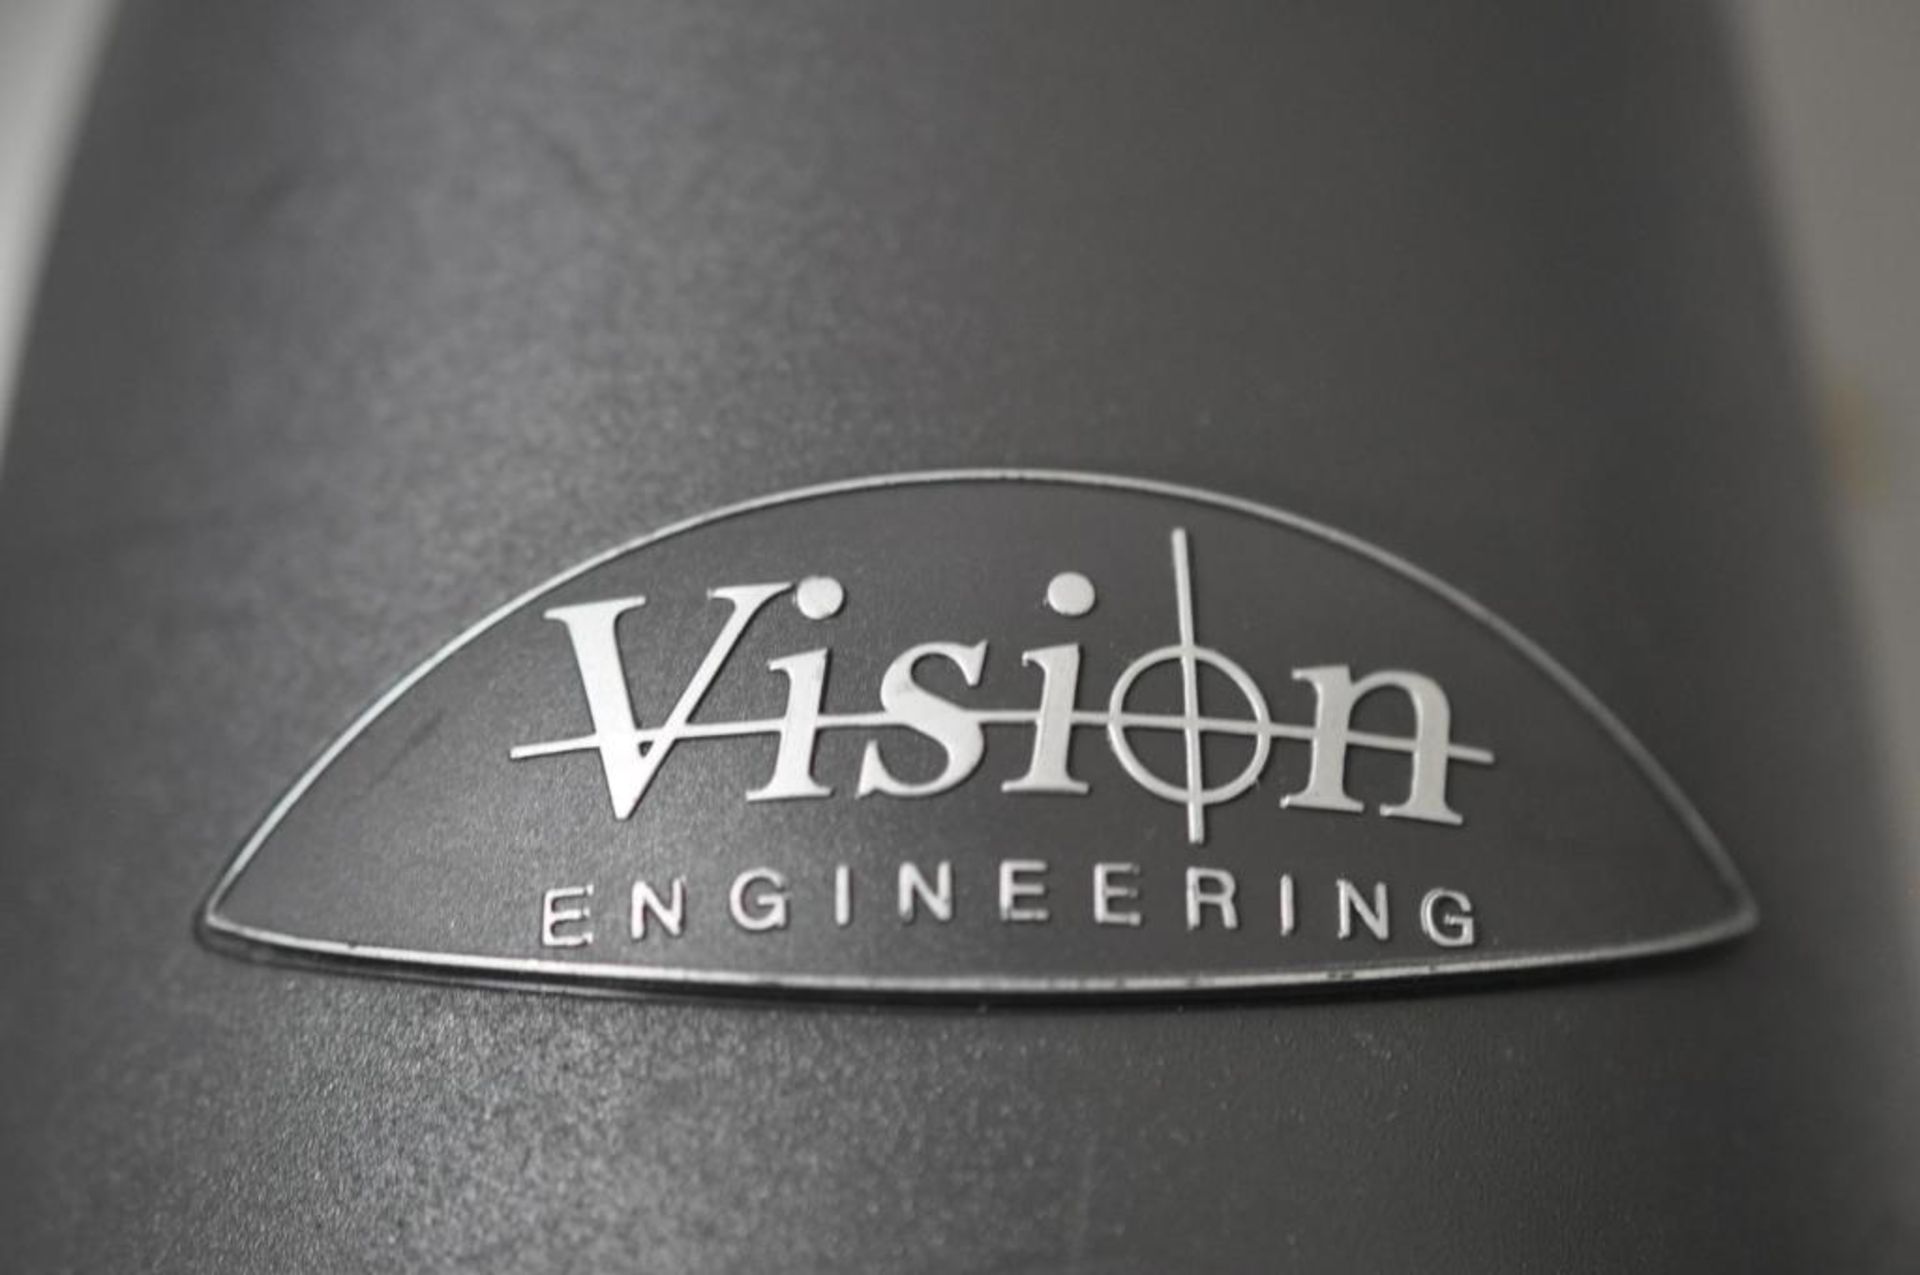 Vision Engineering Stereo Microscope - Image 4 of 6